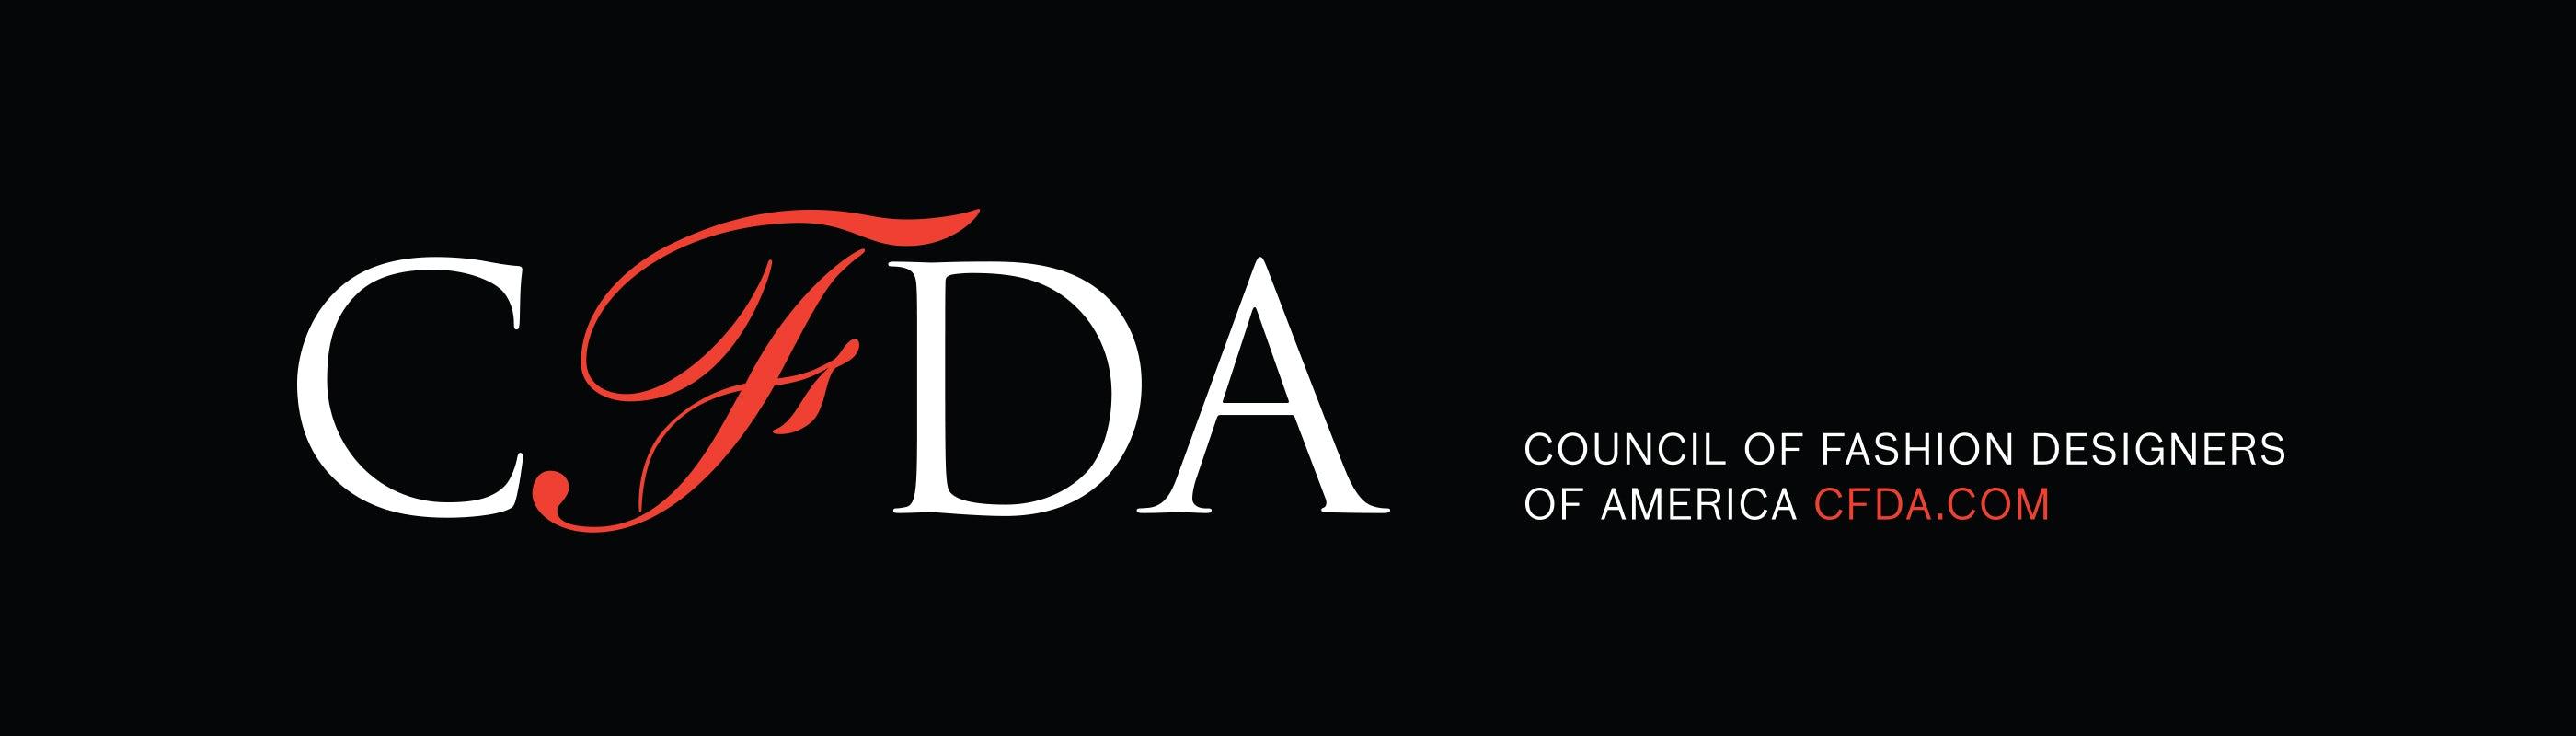 CFDA Logo - Council of Fashion Designers of America's Page. BoF Careers